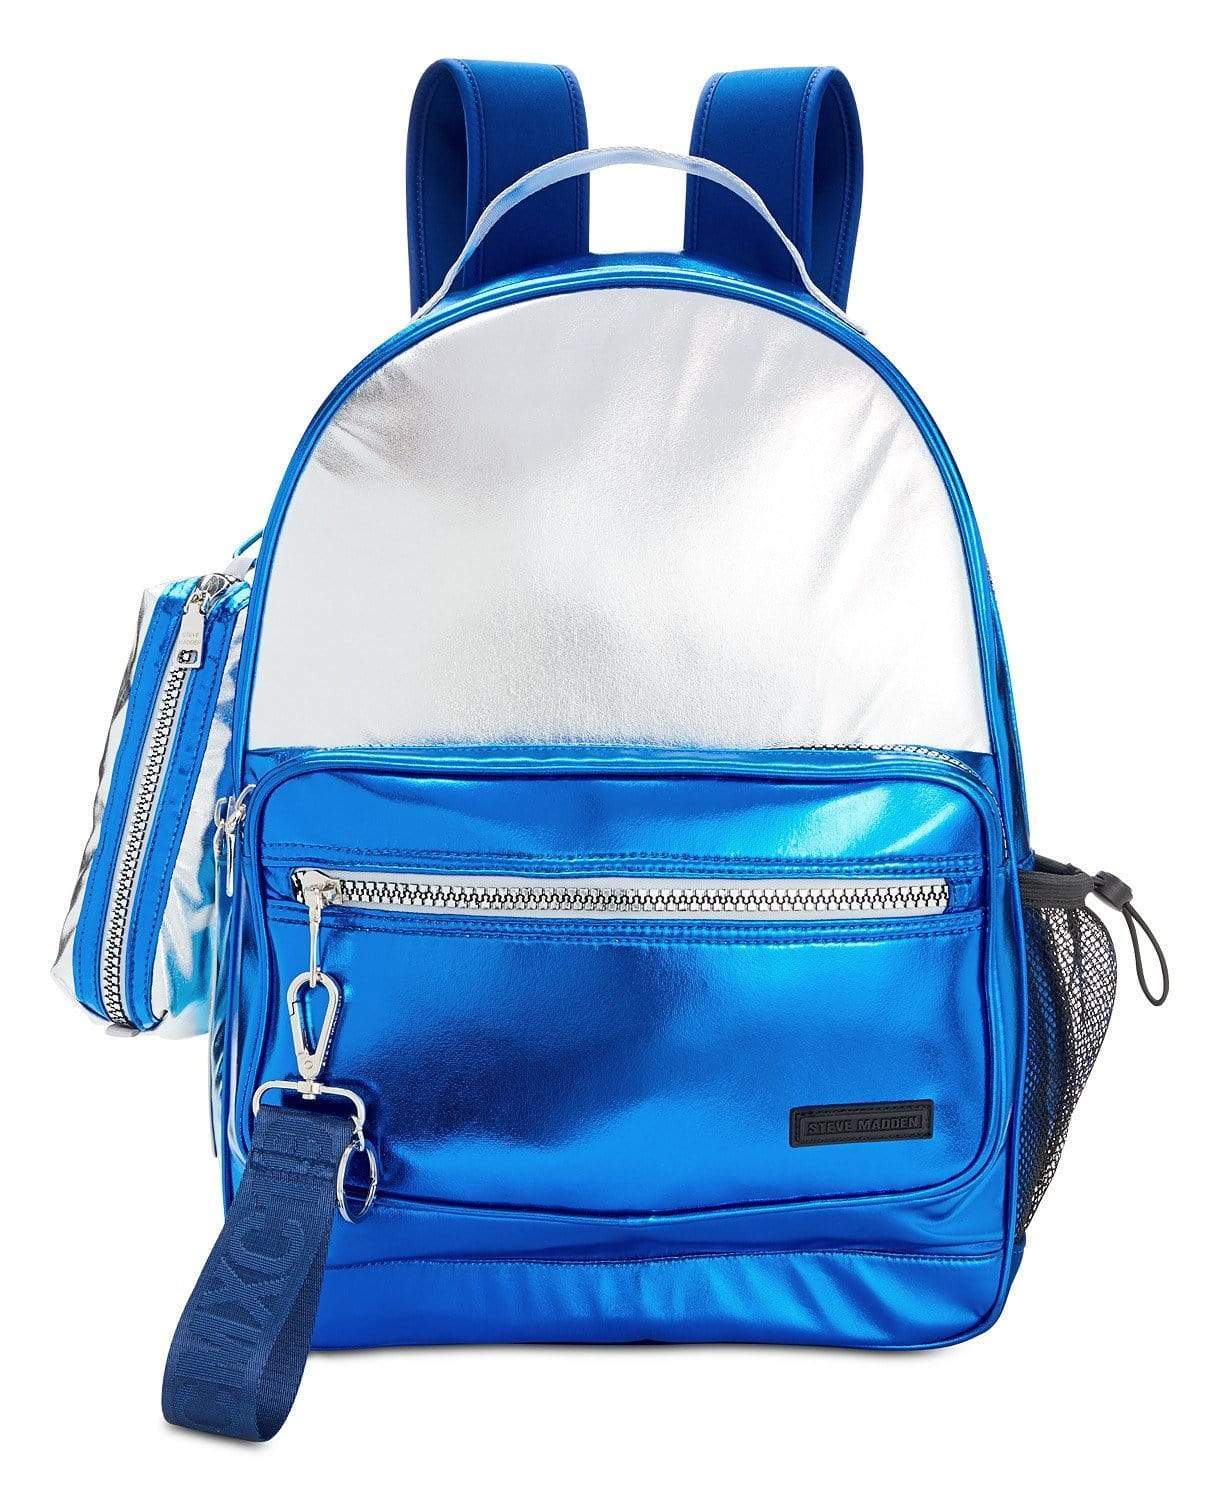 Steve Madden Backpacks & Luggage Kiss Backpack With Pencil Case